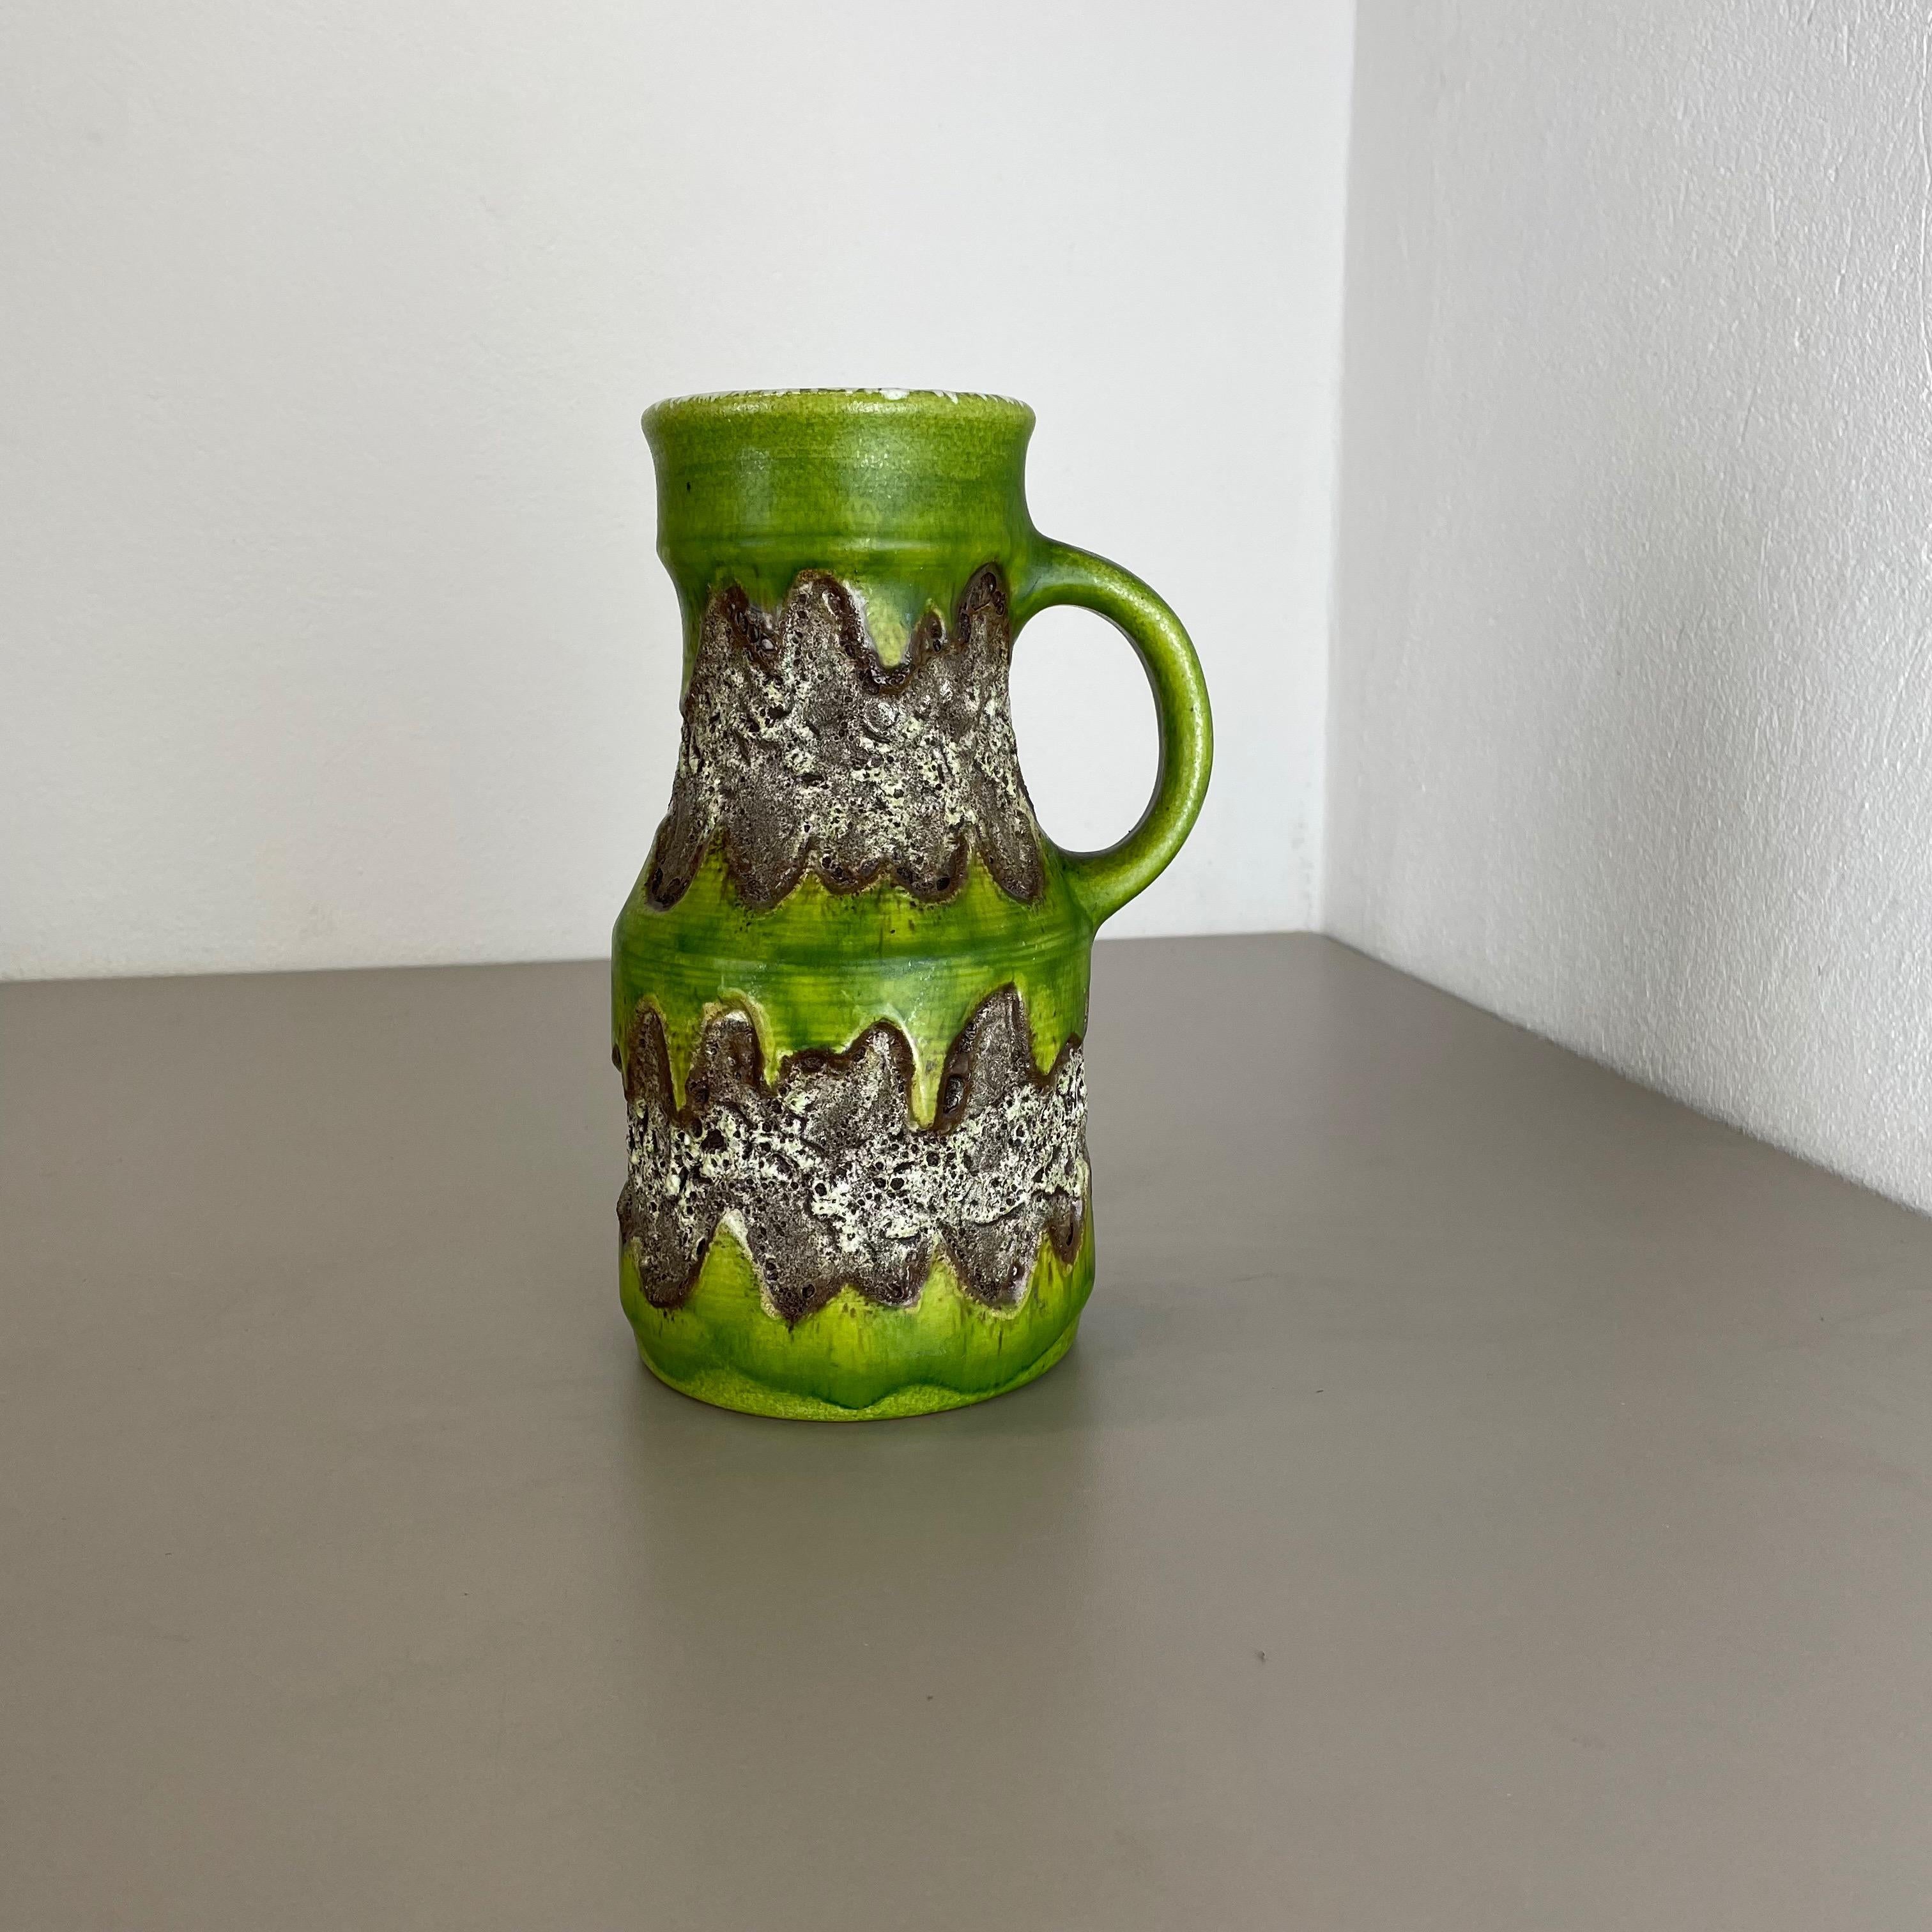 Article:

Pottery ceramic vase 


Producer:

Dümmler and Breiden, Germany


Decade:

1970s





Original vintage 1970s pottery ceramic vase made in Germany. High quality German production with a nice abstract coloration. The vase